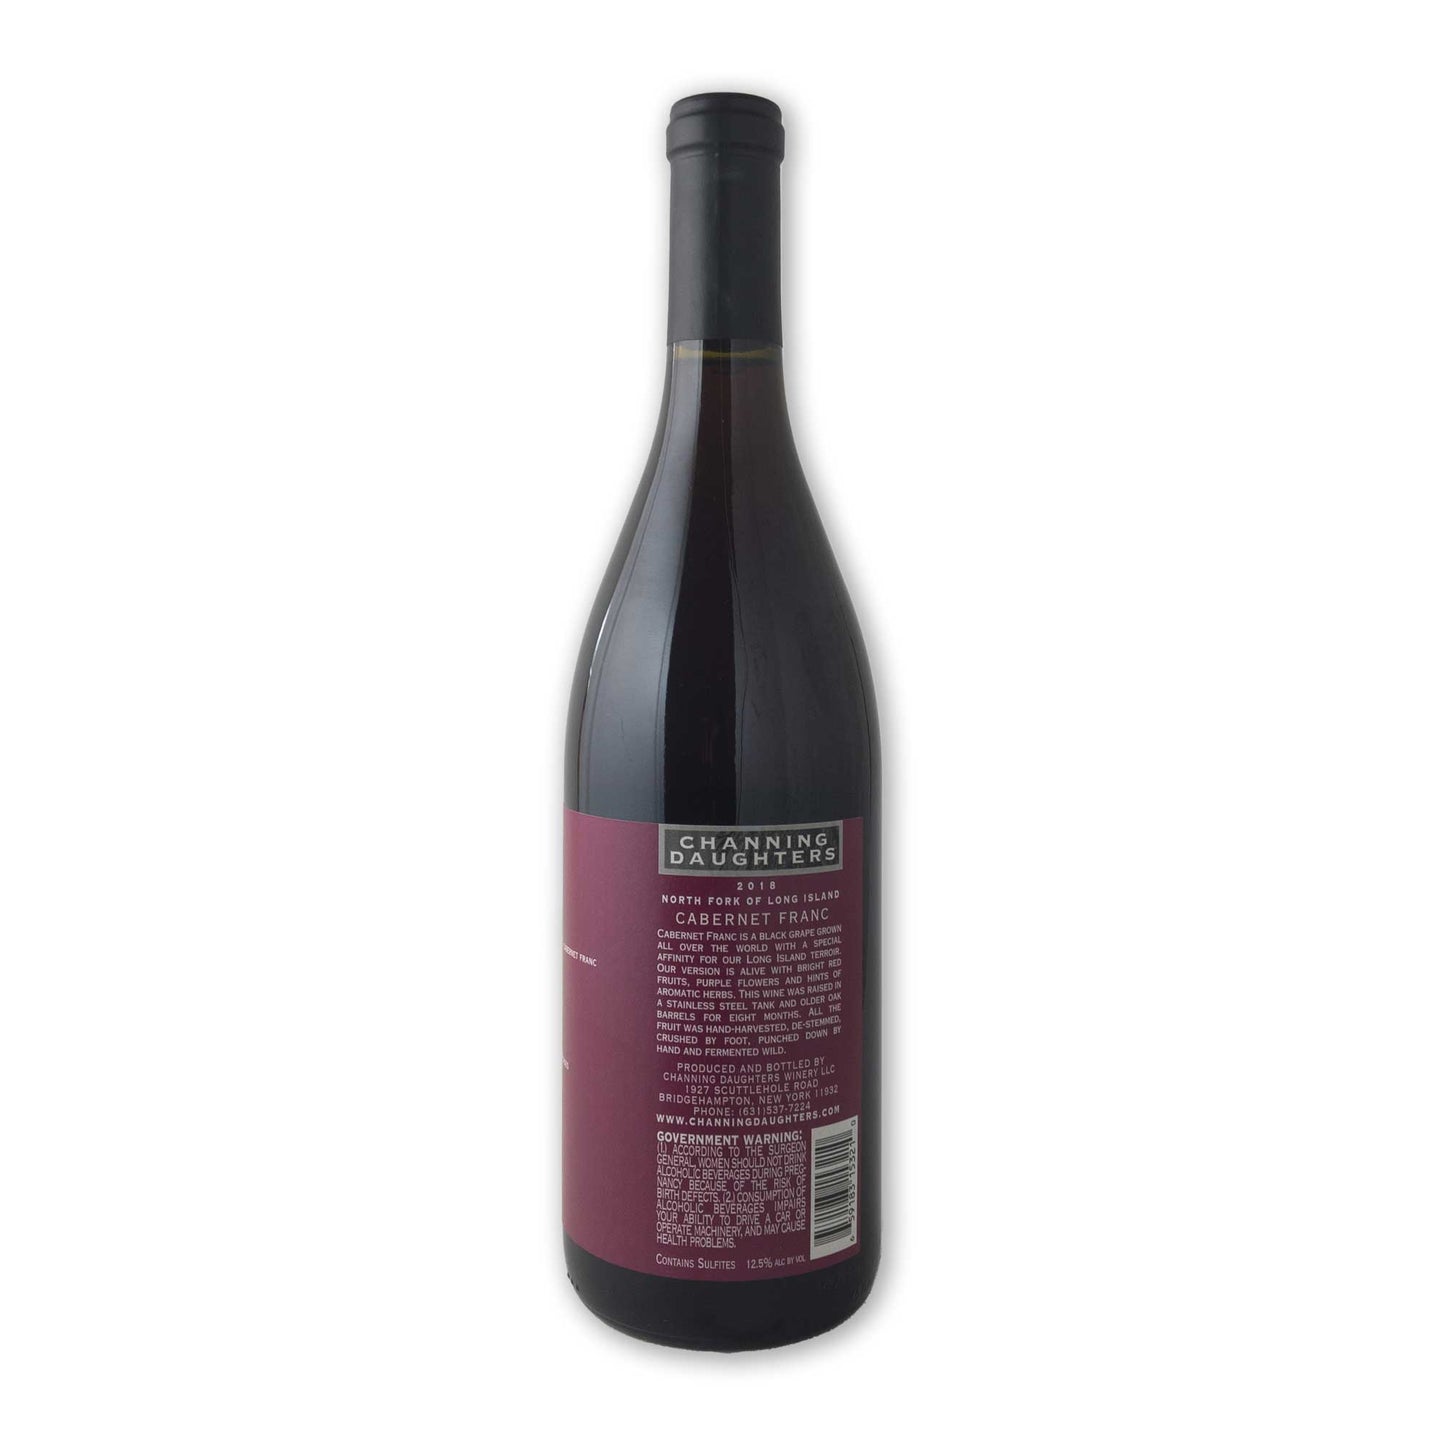 Channing Daughters - Cabernet Franc - Long Island - 2018